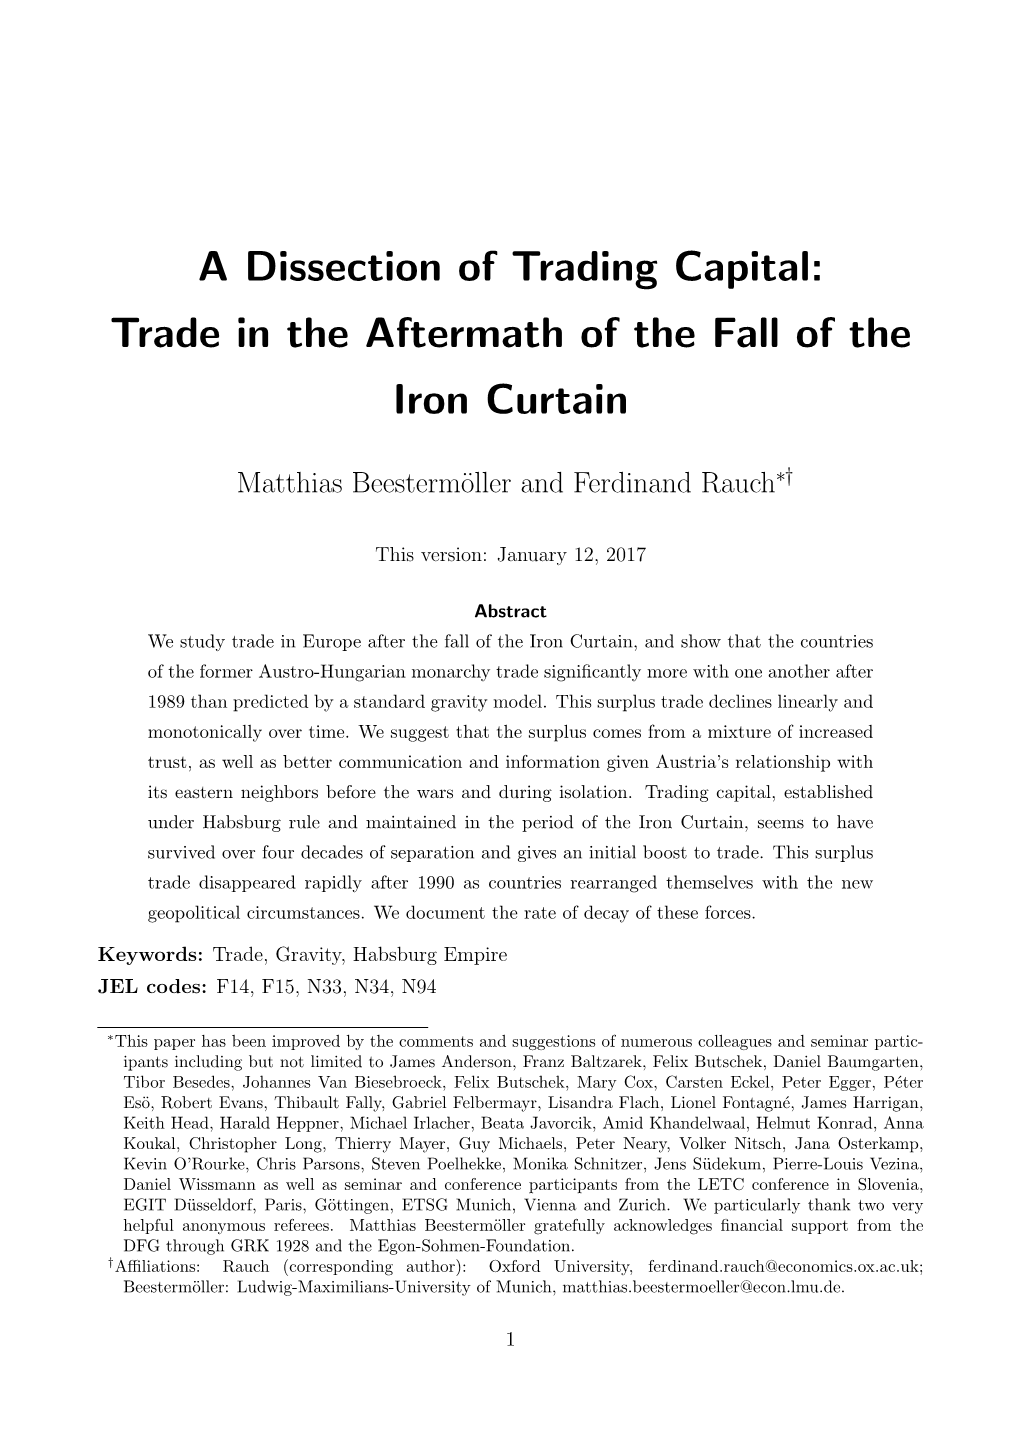 Trade in the Aftermath of the Fall of the Iron Curtain